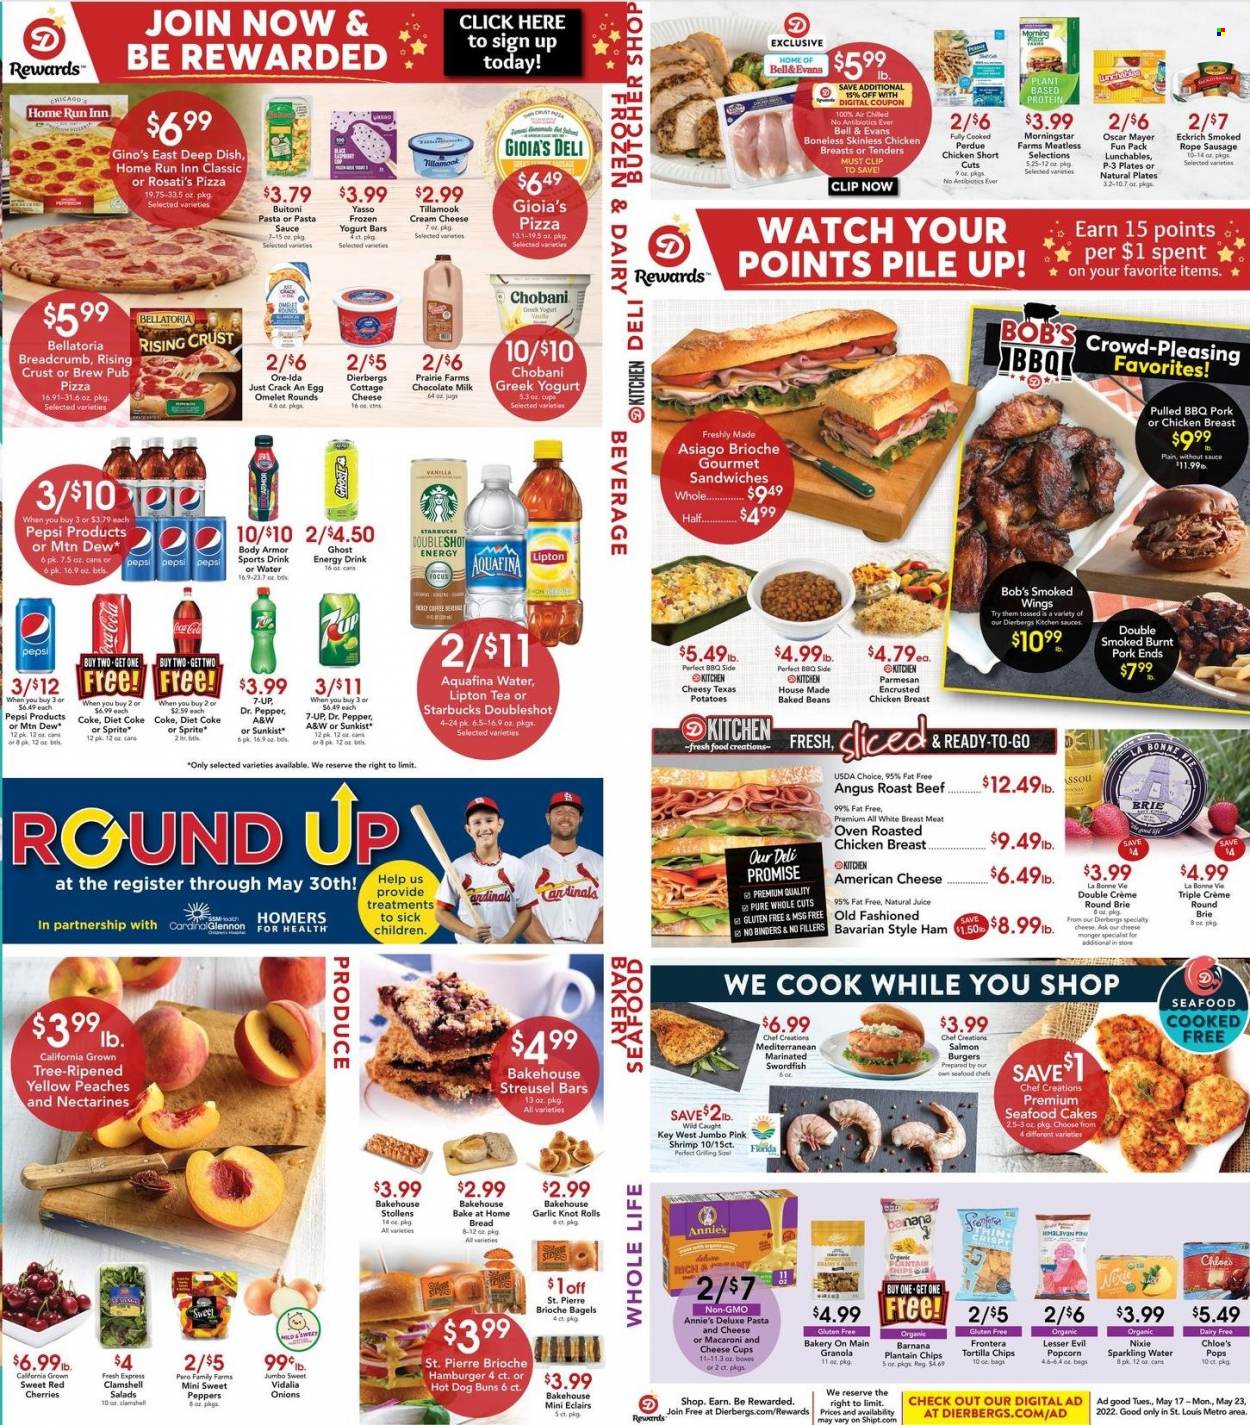 thumbnail - Dierbergs Flyer - 05/17/2022 - 05/23/2022 - Sales products - bagels, bread, cake, buns, brioche, garlic, potatoes, onion, peppers, cherries, salmon, swordfish, seafood, shrimps, pizza, chicken roast, sandwich, hamburger, MorningStar Farms, Perdue®, Annie's, Lunchables, Buitoni, ham, sausage, american cheese, asiago, cottage cheese, cheese cup, parmesan, brie, greek yoghurt, Chobani, milk, Ore-Ida, Bellatoria, milk chocolate, chocolate, tortilla chips, baked beans, granola, Coca-Cola, Mountain Dew, Sprite, Pepsi, juice, Body Armor, energy drink, Lipton, Dr. Pepper, Diet Coke, 7UP, A&W, Aquafina, sparkling water, tea, coffee, Starbucks, chicken breasts, beef meat, roast beef, nectarines, peaches. Page 3.